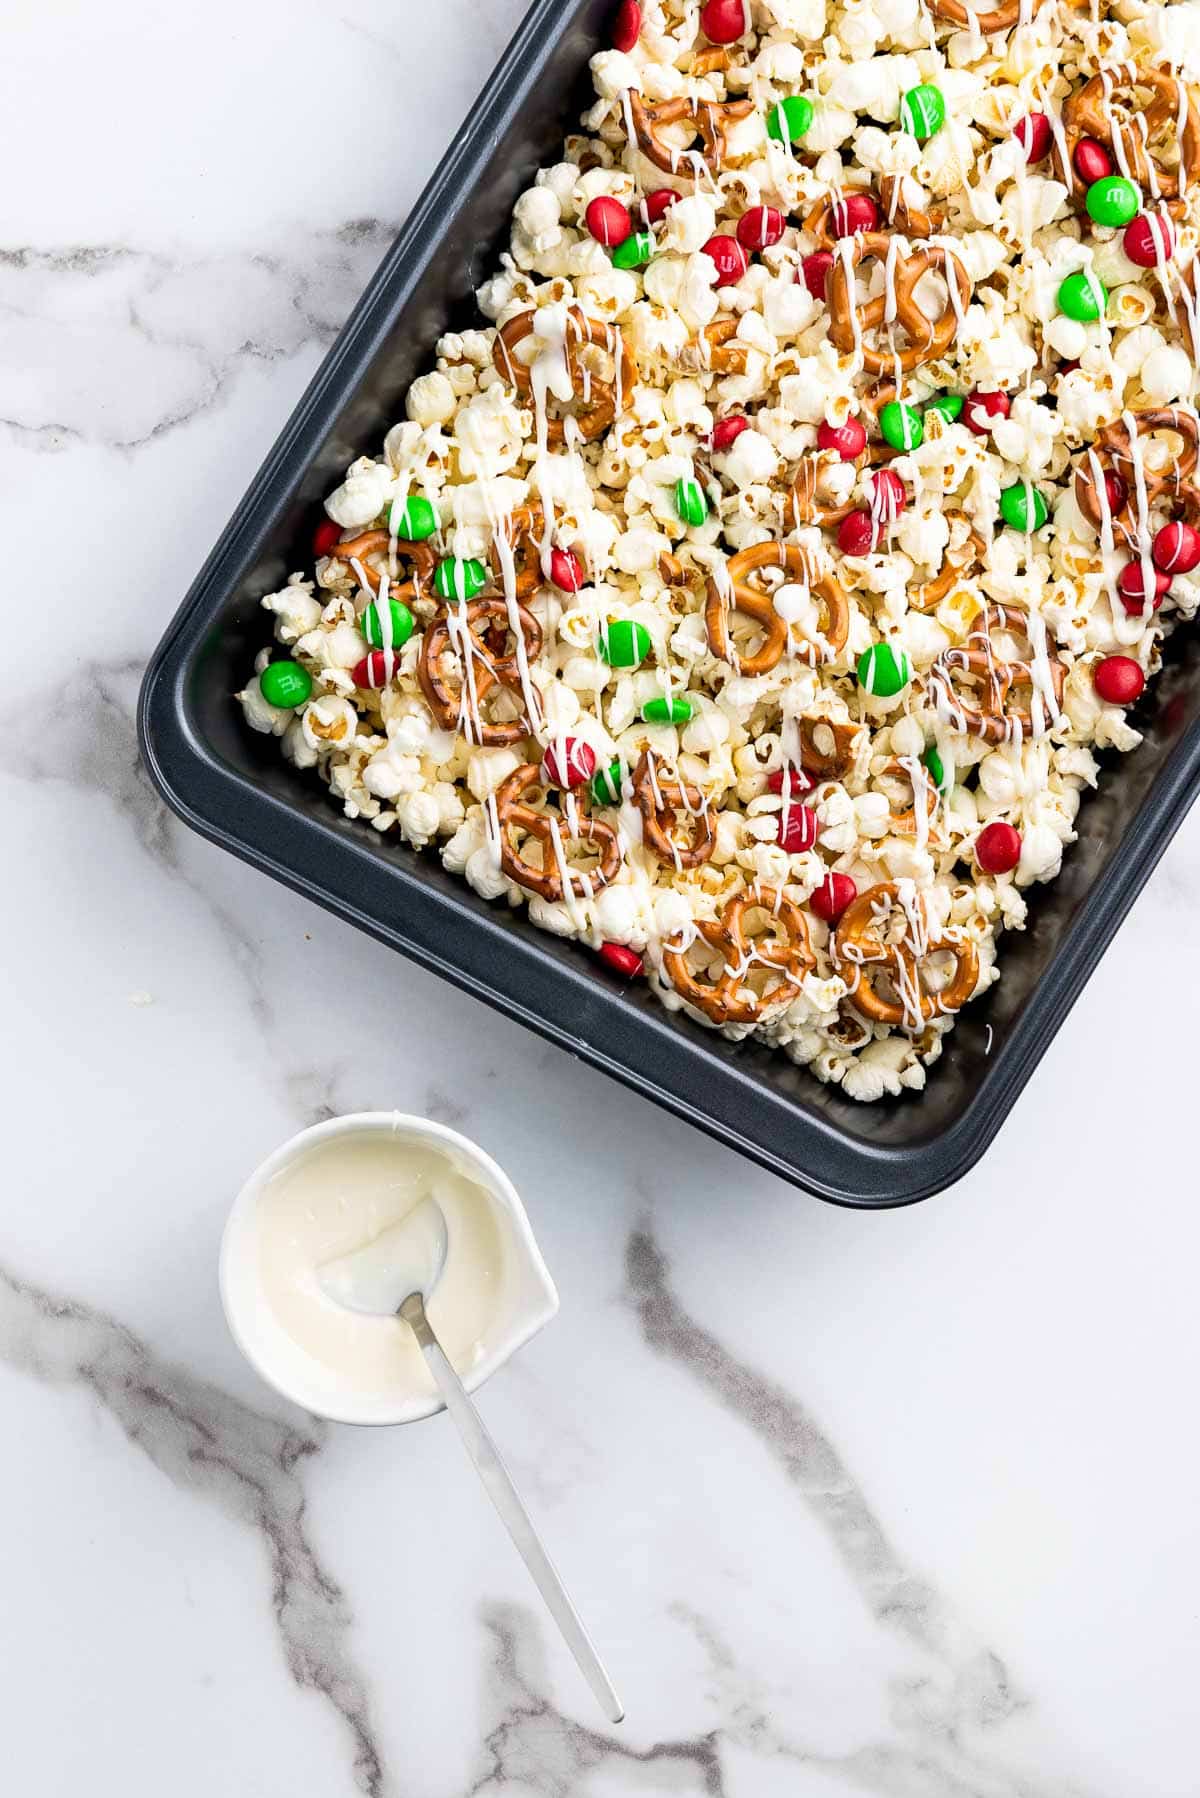 Christmas popcorn Santa munch drizzled with white chocolate in a black baking tray with white chocolate on the side on top of a marble surface.